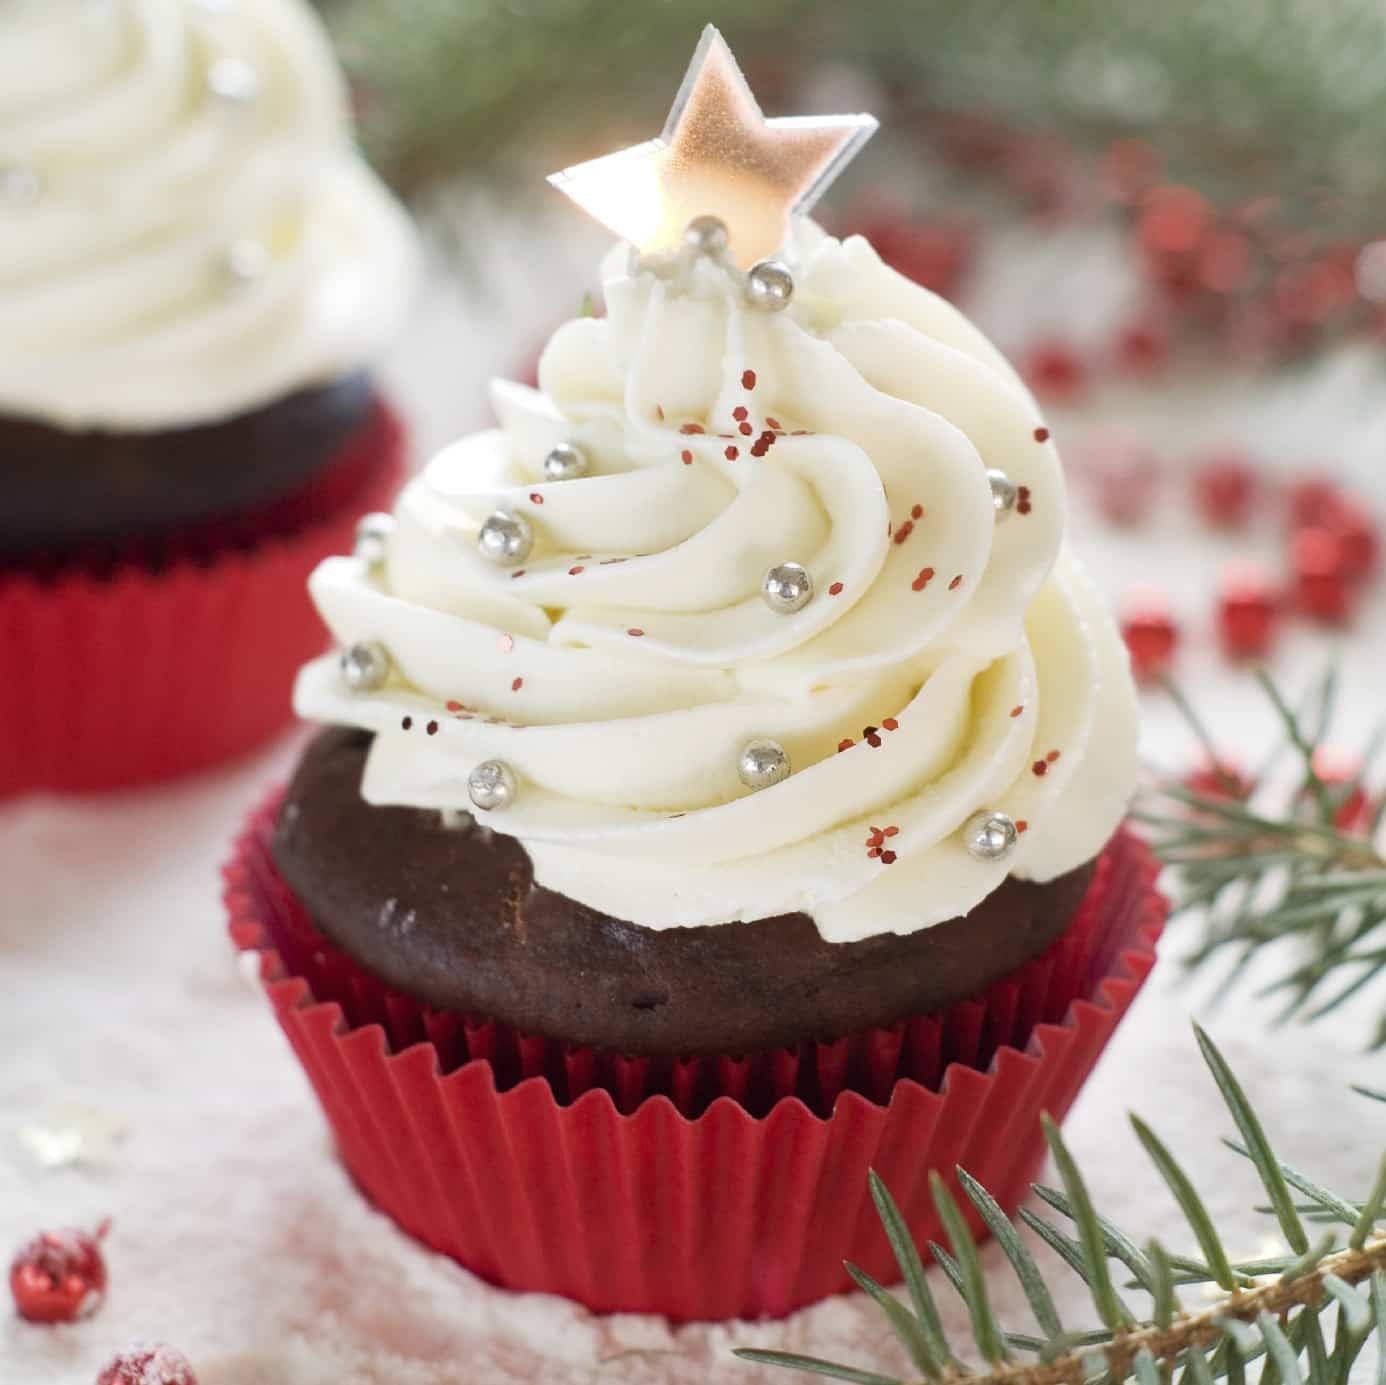 gingerbread cupcakes with cream cheese frosting.